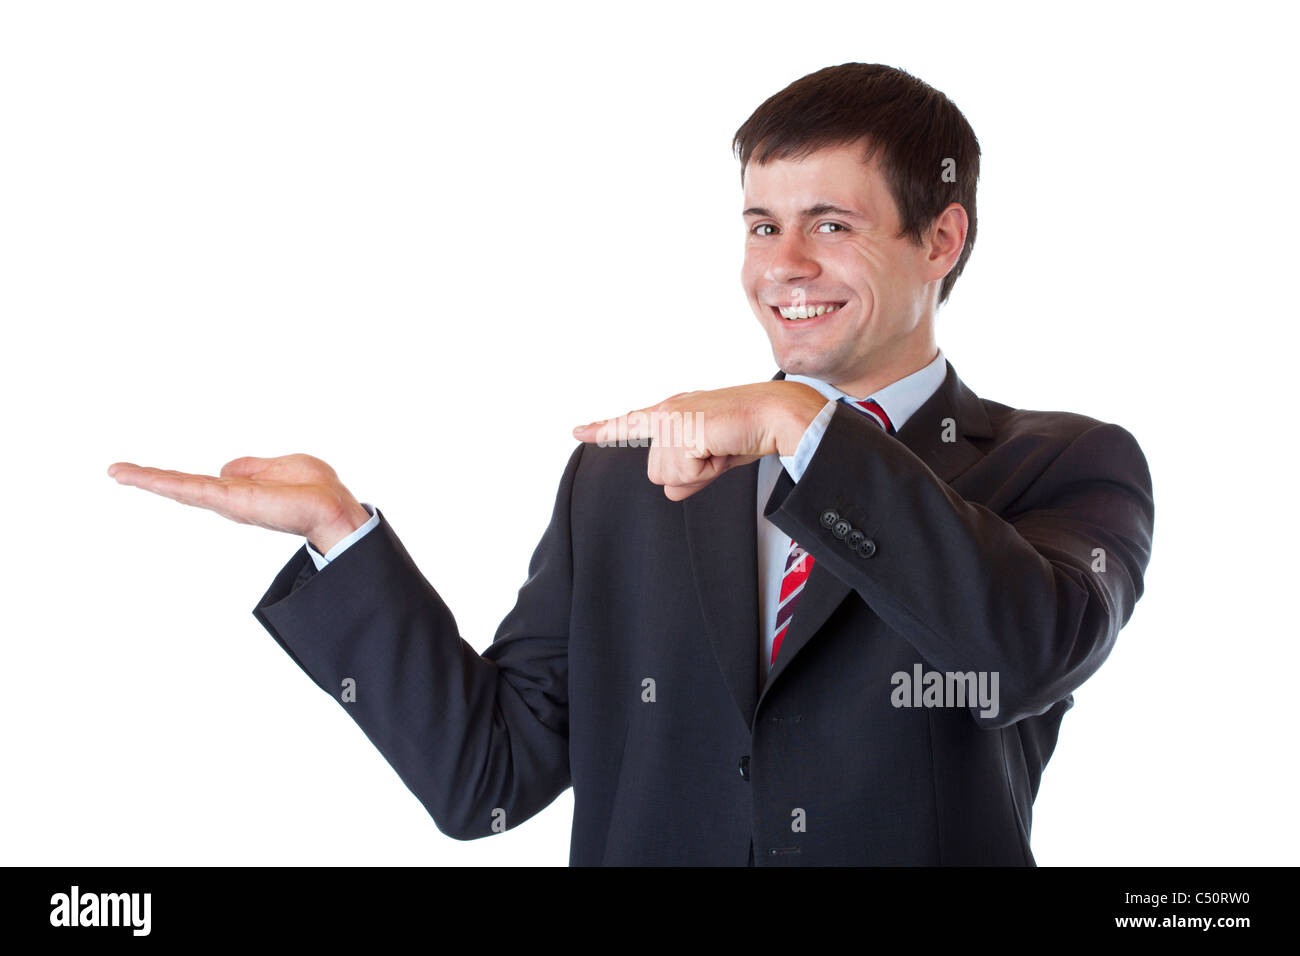 Young businessman points to ad text in his palm and smiles. Isolated on white background. Stock Photo